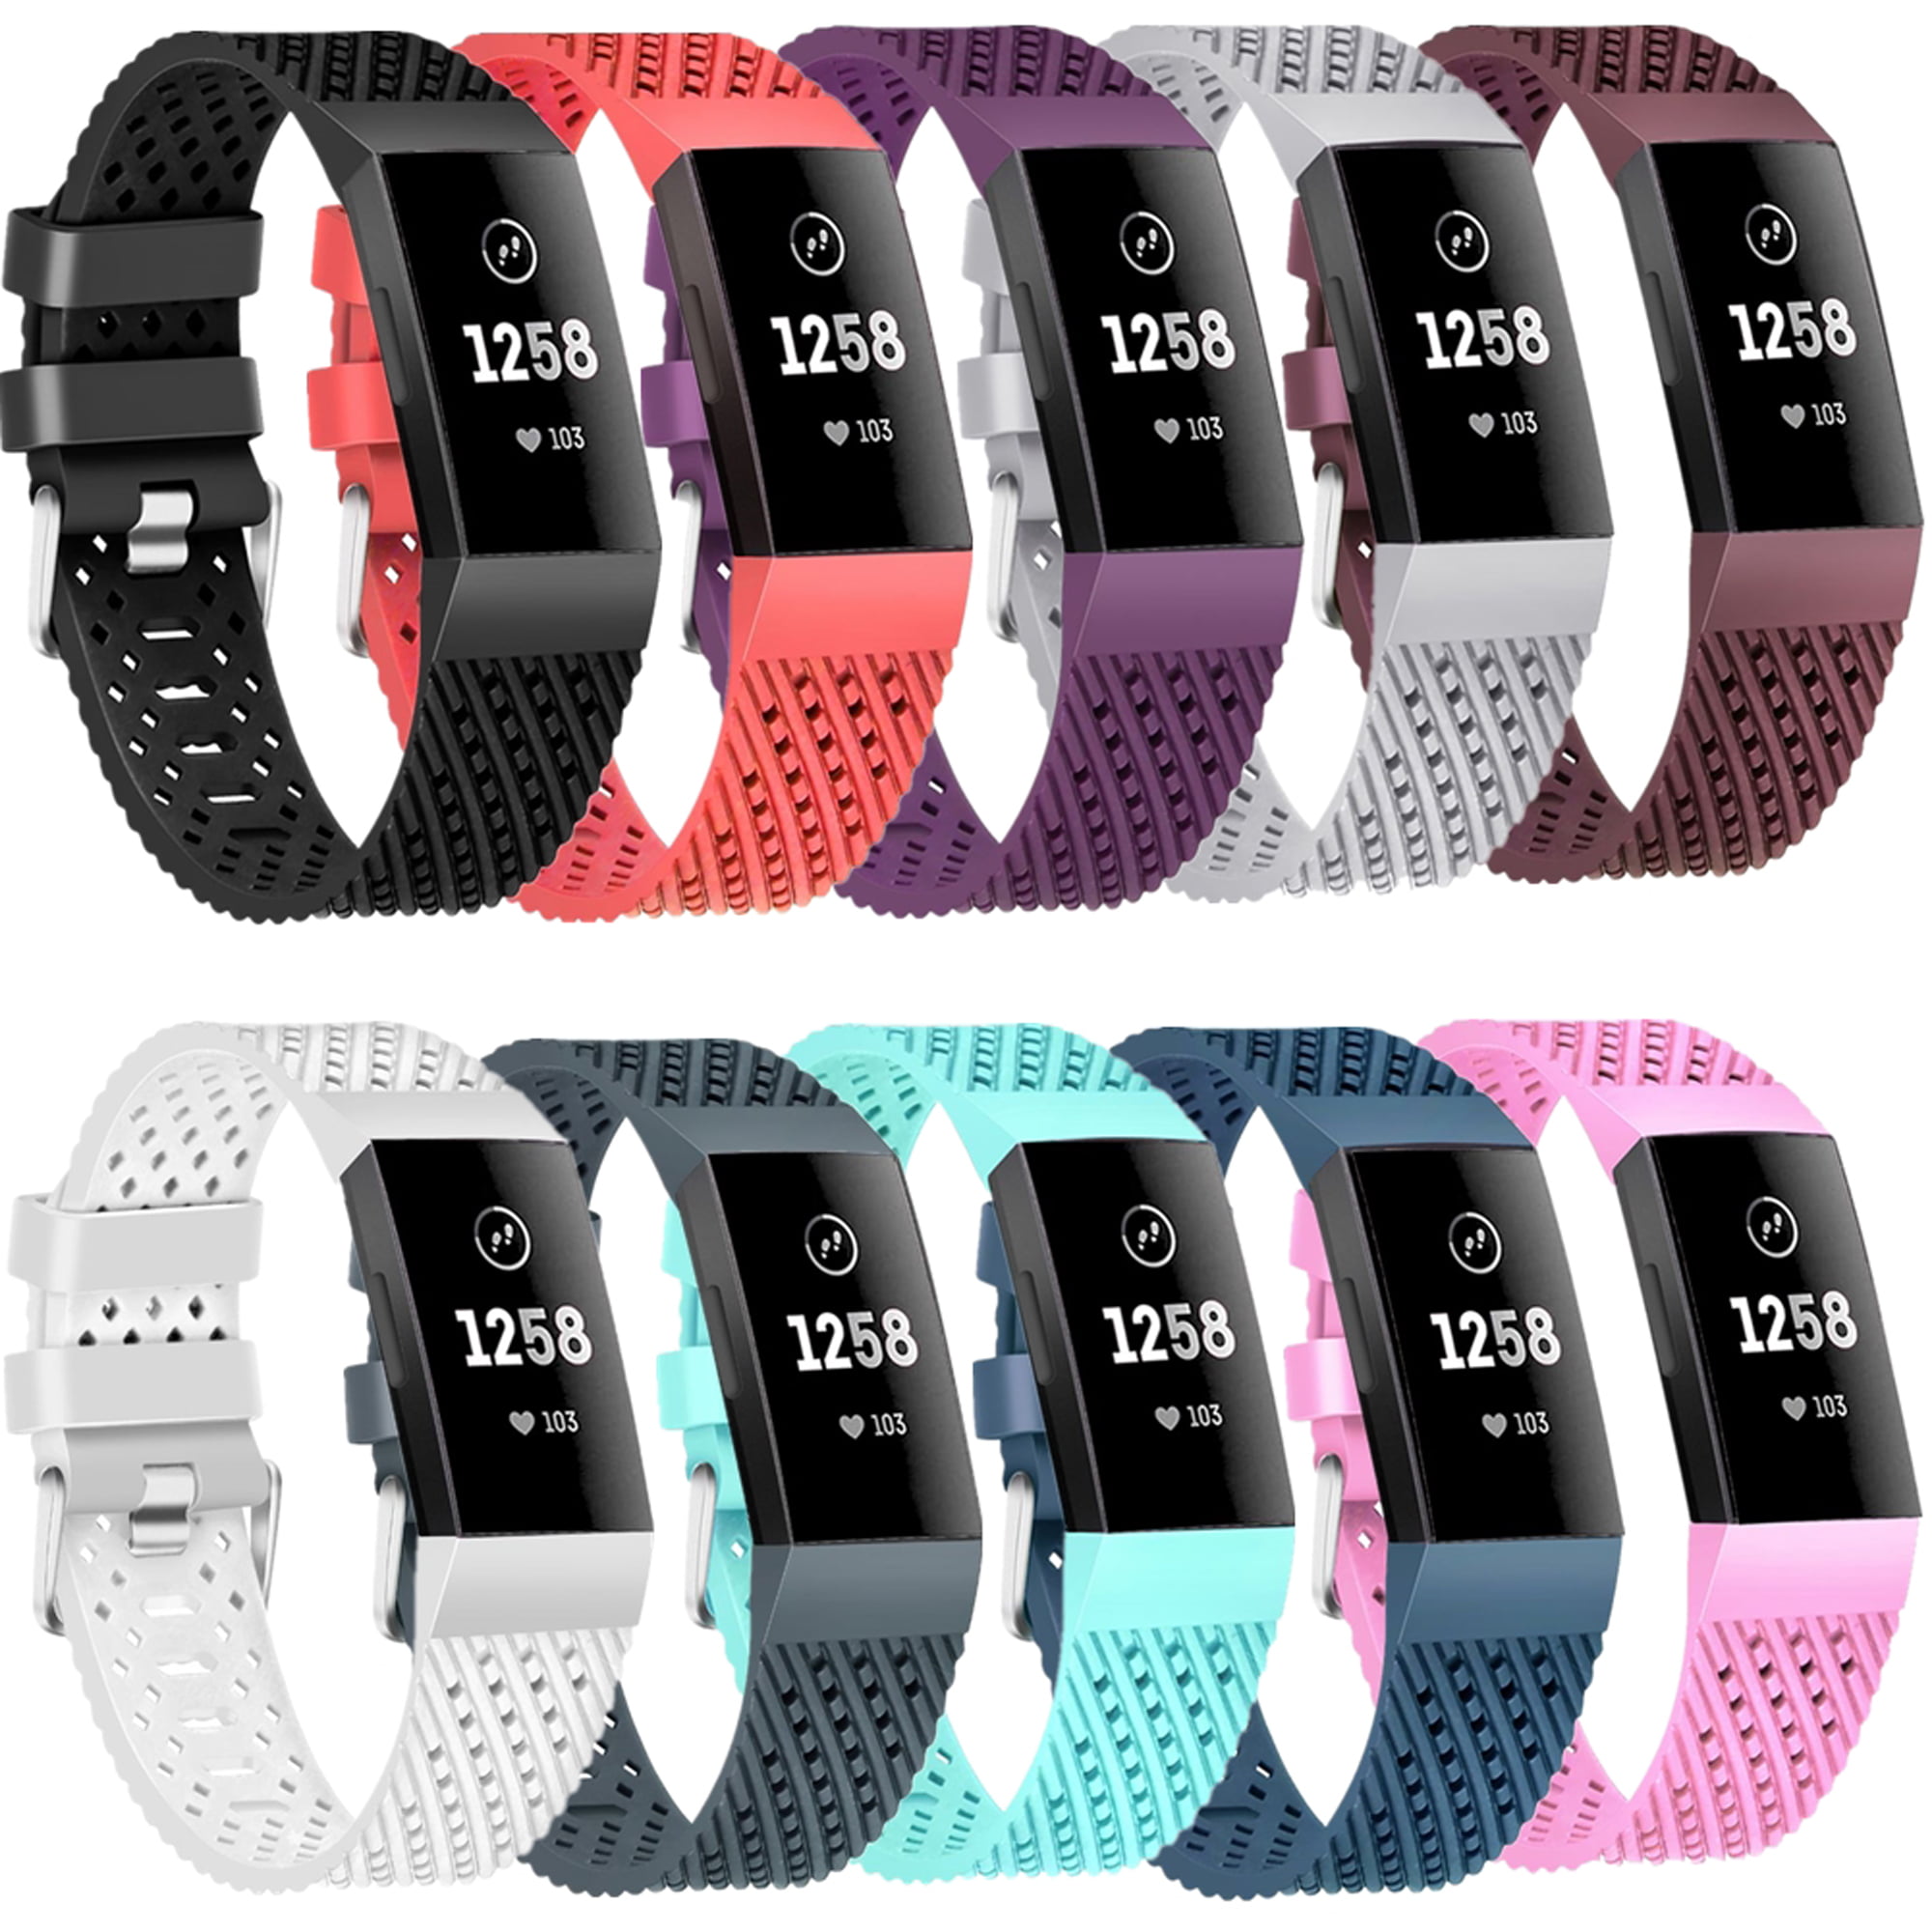 Fiber Band Breathable Replacement Wristband Wrist Strap For Fitbit Charge 3 